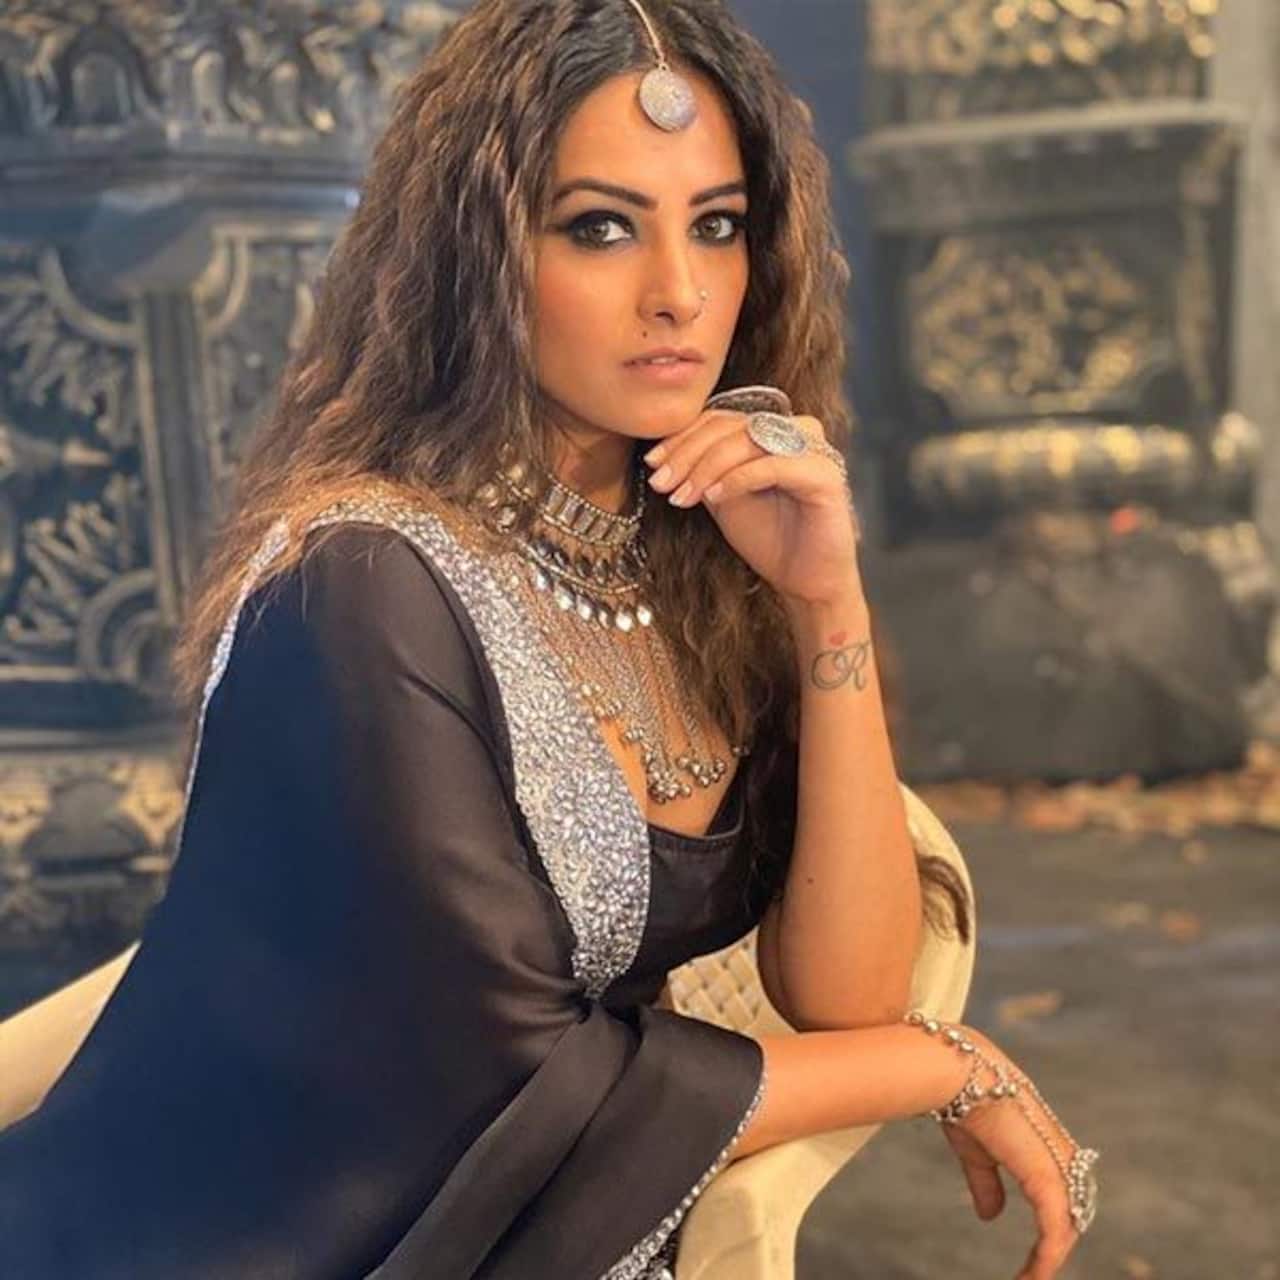 Naagin 4 Actress Anita Hassanandani Looks Drop Dead Gorgeous In Her Latest Look From The Show